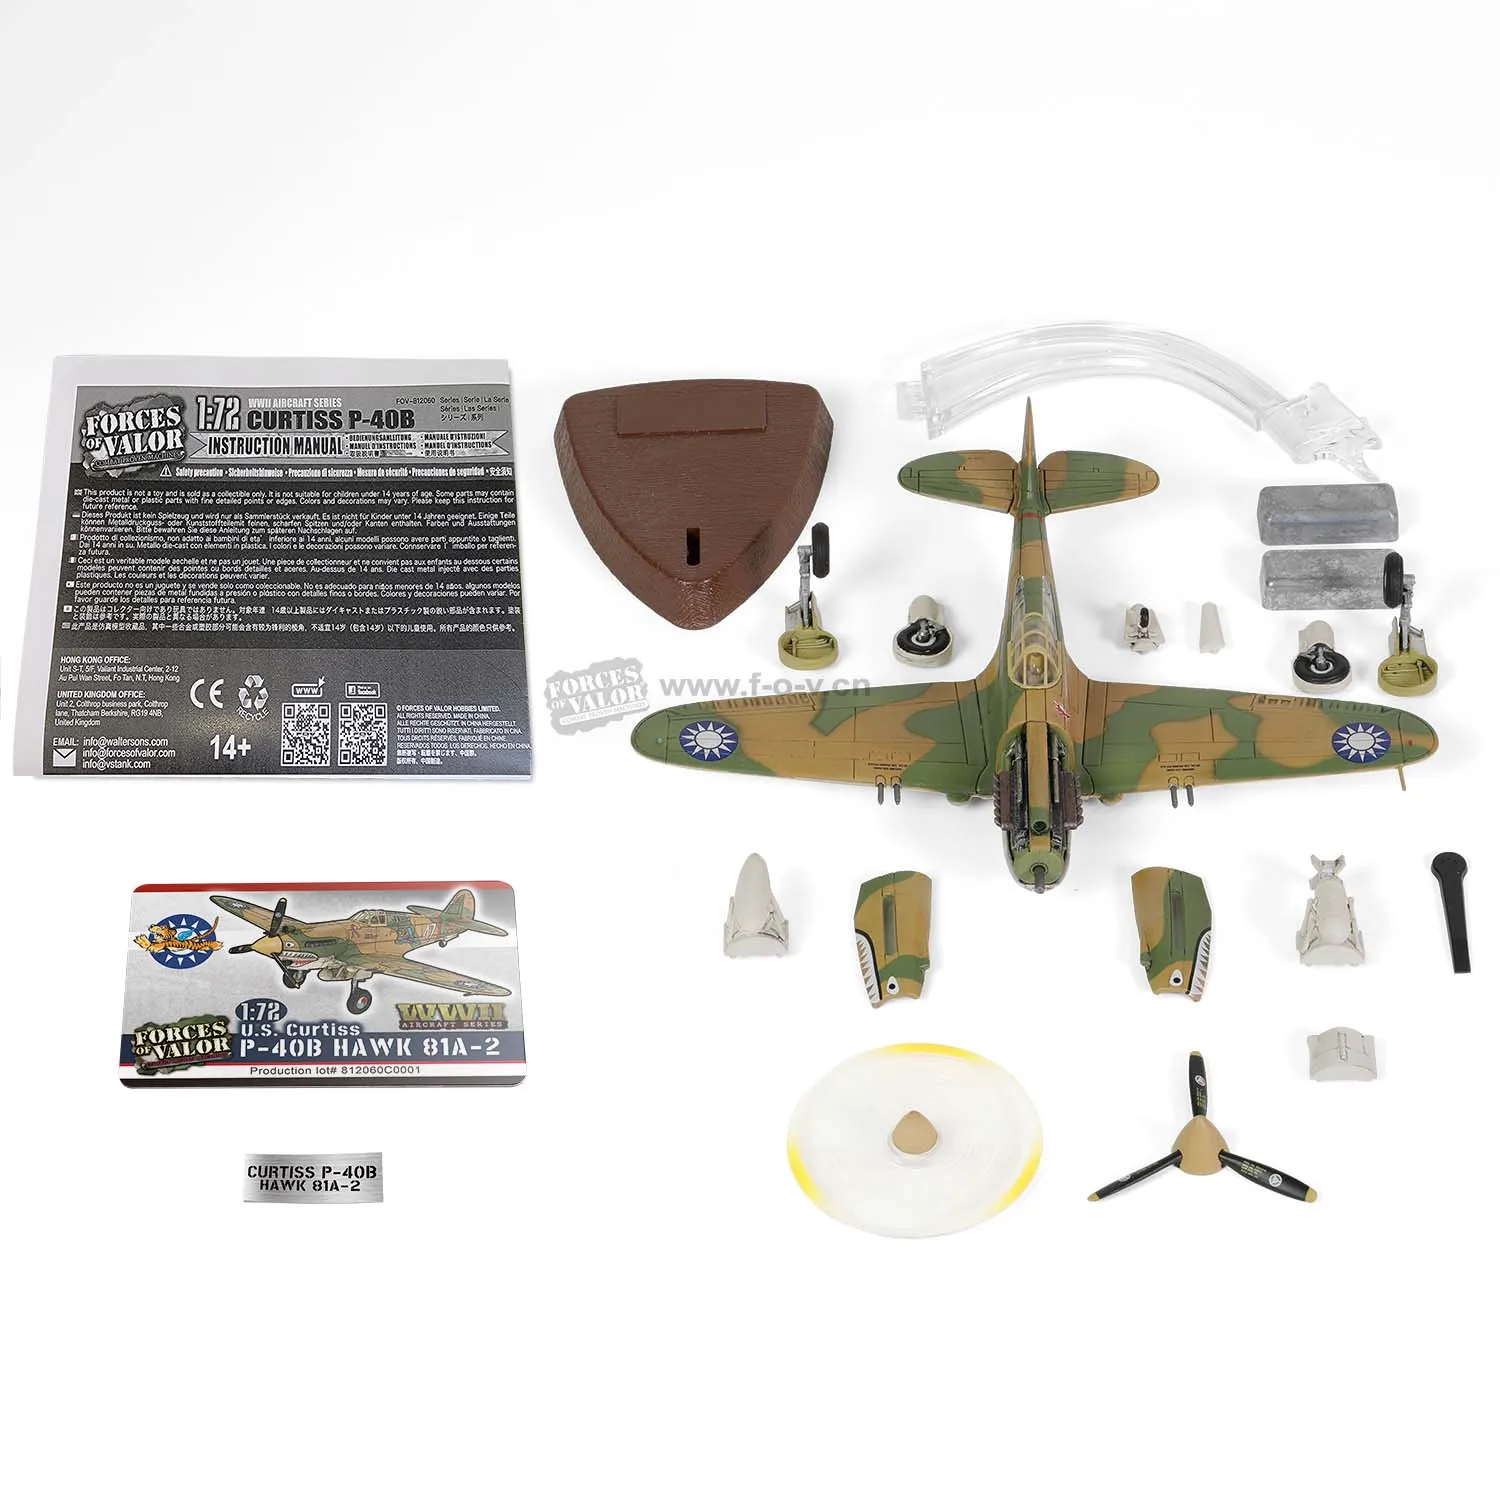 

FOV 1/72 Scale Diecast Plane Toys U.S. Curtiss P-40B / HAWK 81A-2 Die-Cast Metal Aircraft Model Toy For Boys Kids Collection